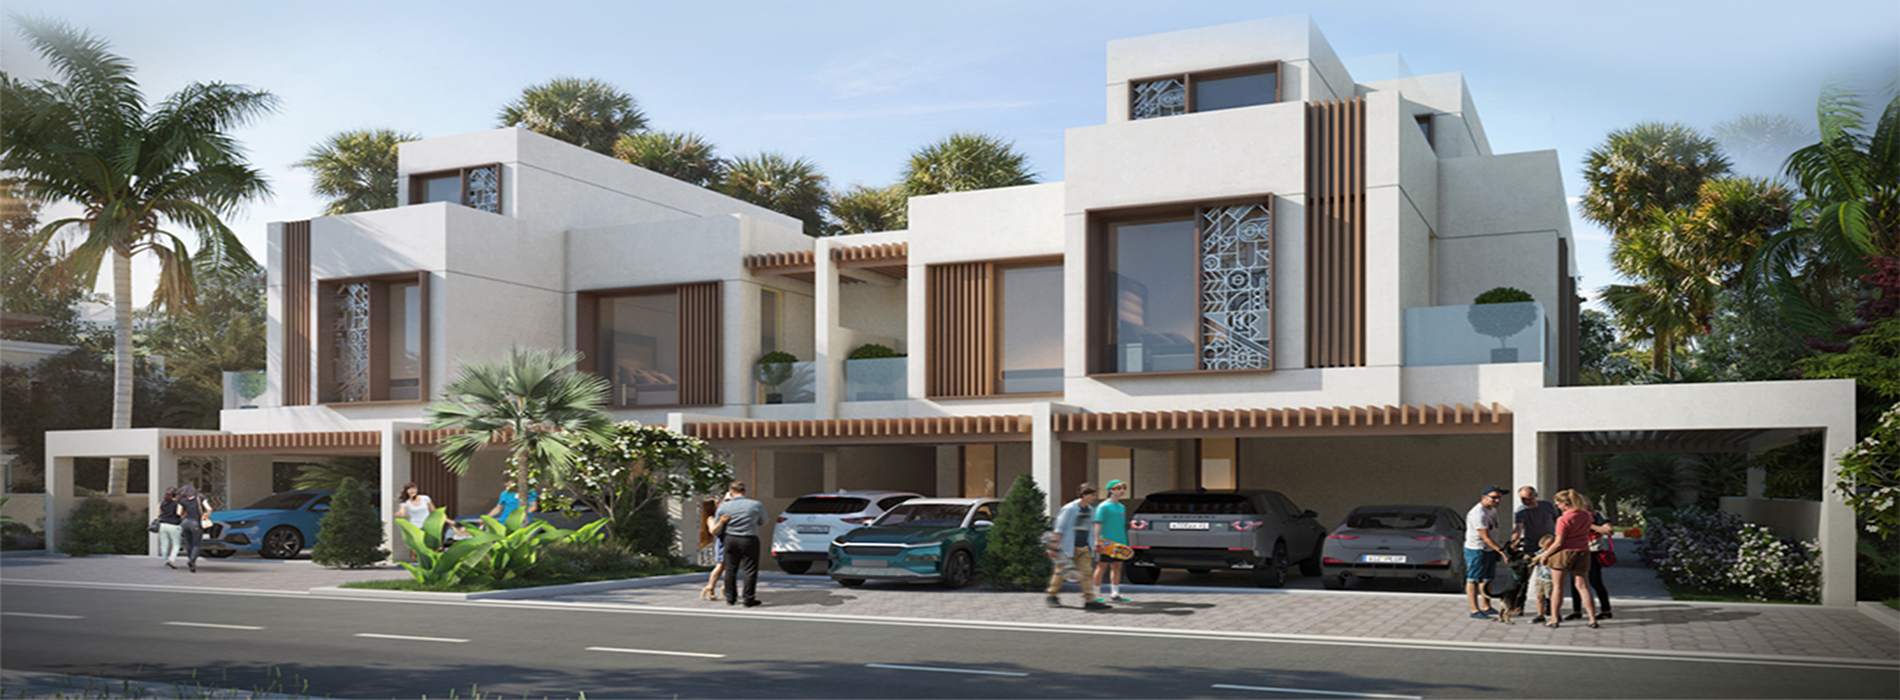 PROPERTY FOR SALE IN MARBELLA